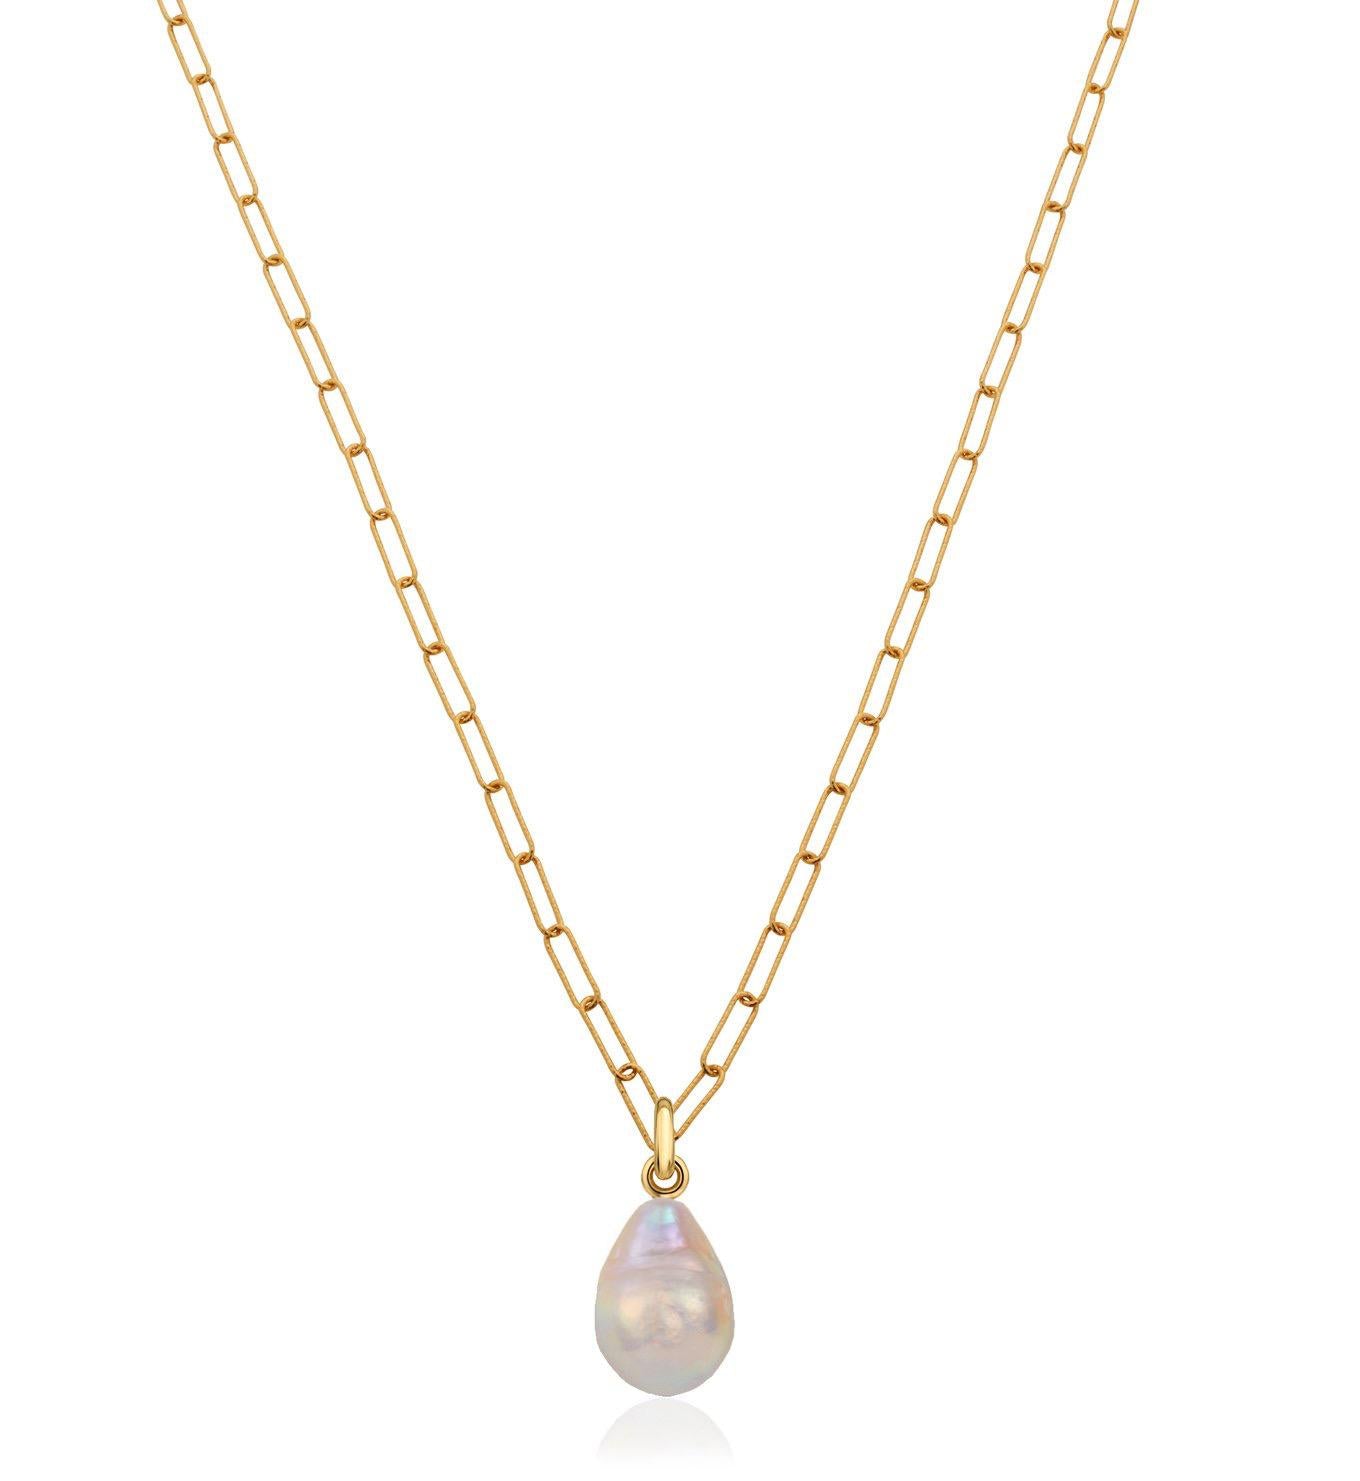 Baroque Pearl Teardrop Paperclip Necklace/18k Yellow Gold with Baroque Pearl - InfinityXInfinity